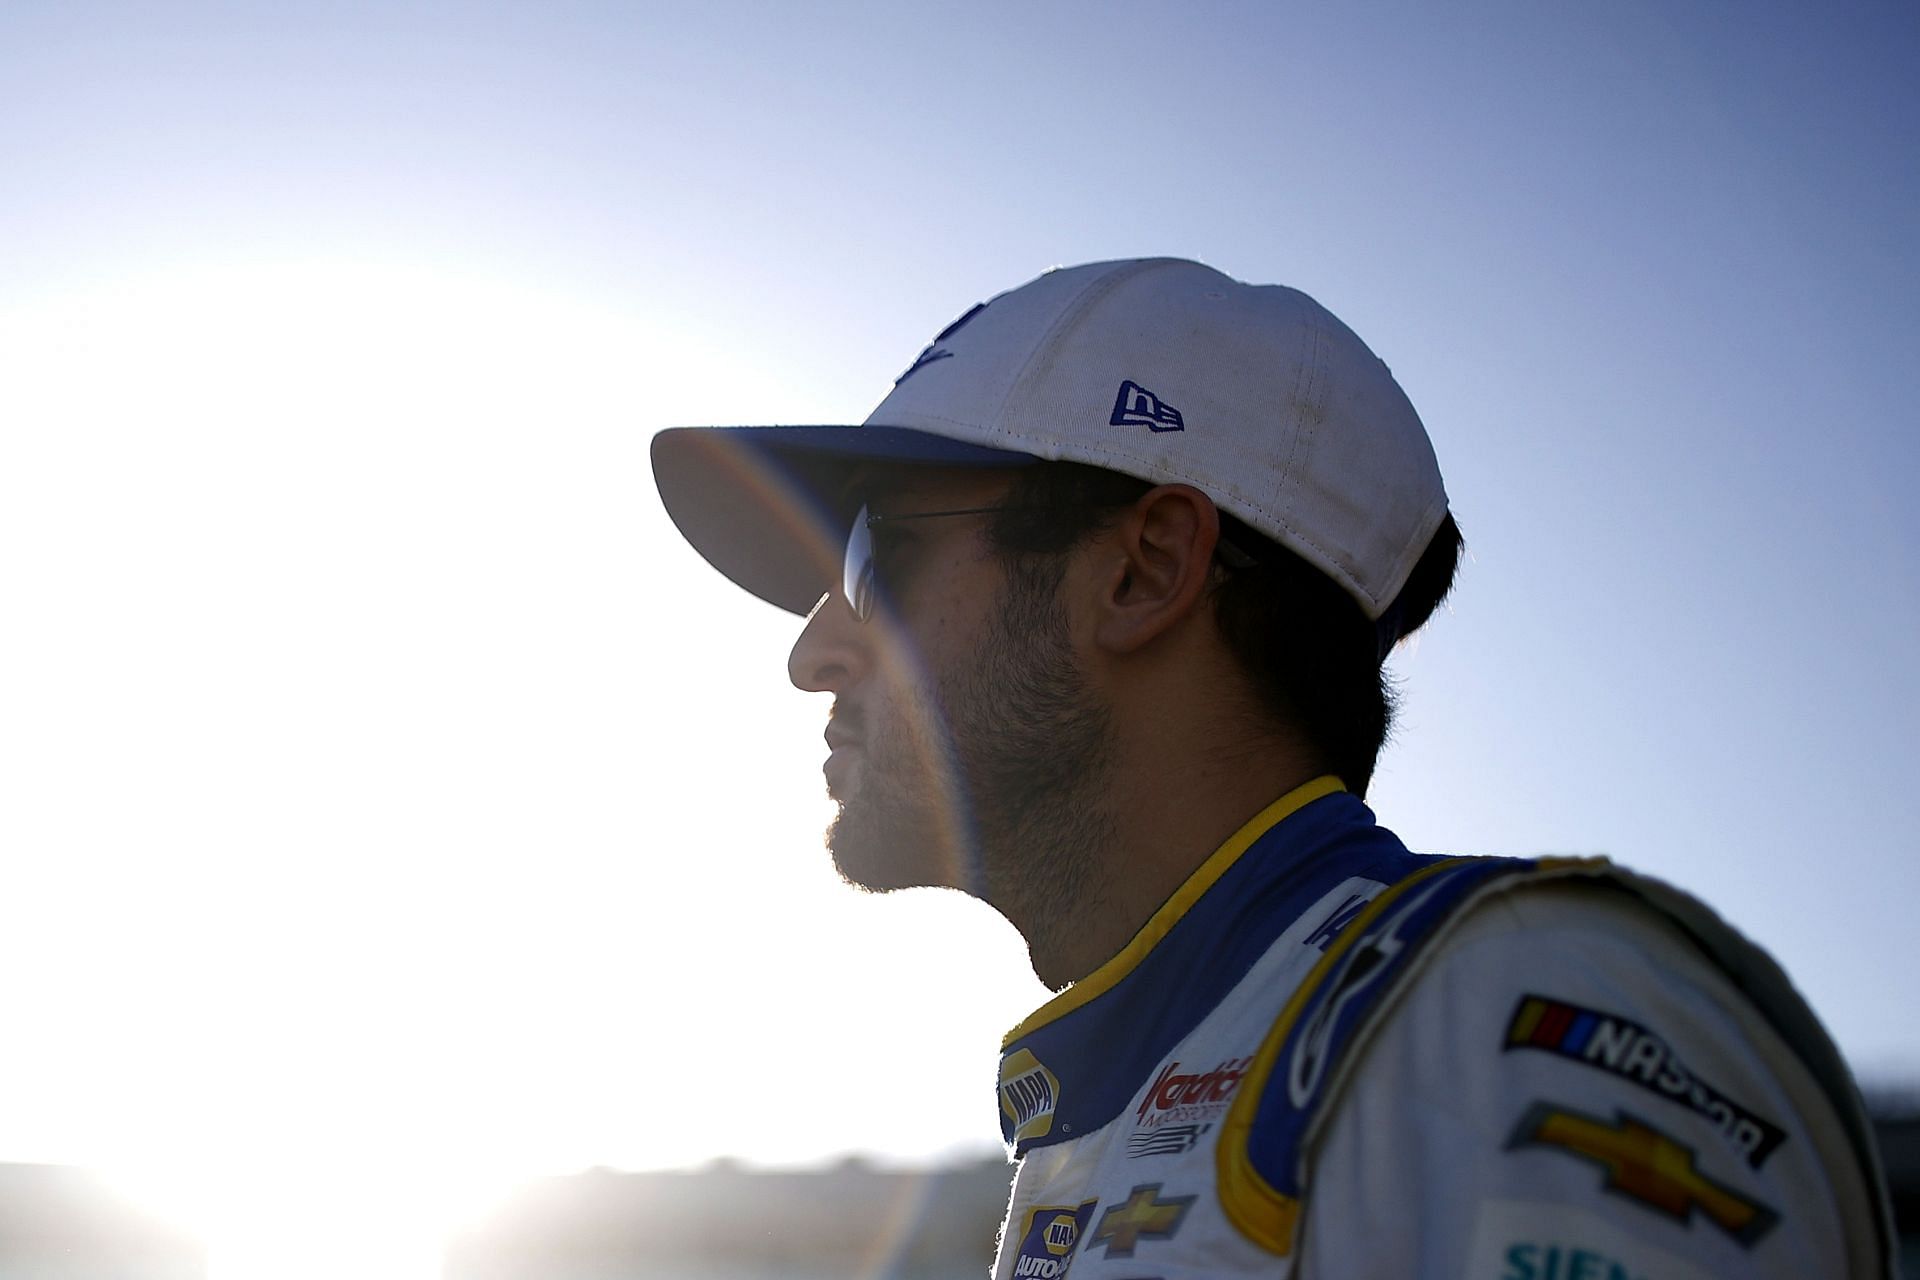 Chase Elliott feels that the reconfigured Atlanta Motorsport Speedway could be &quot;really good&quot;